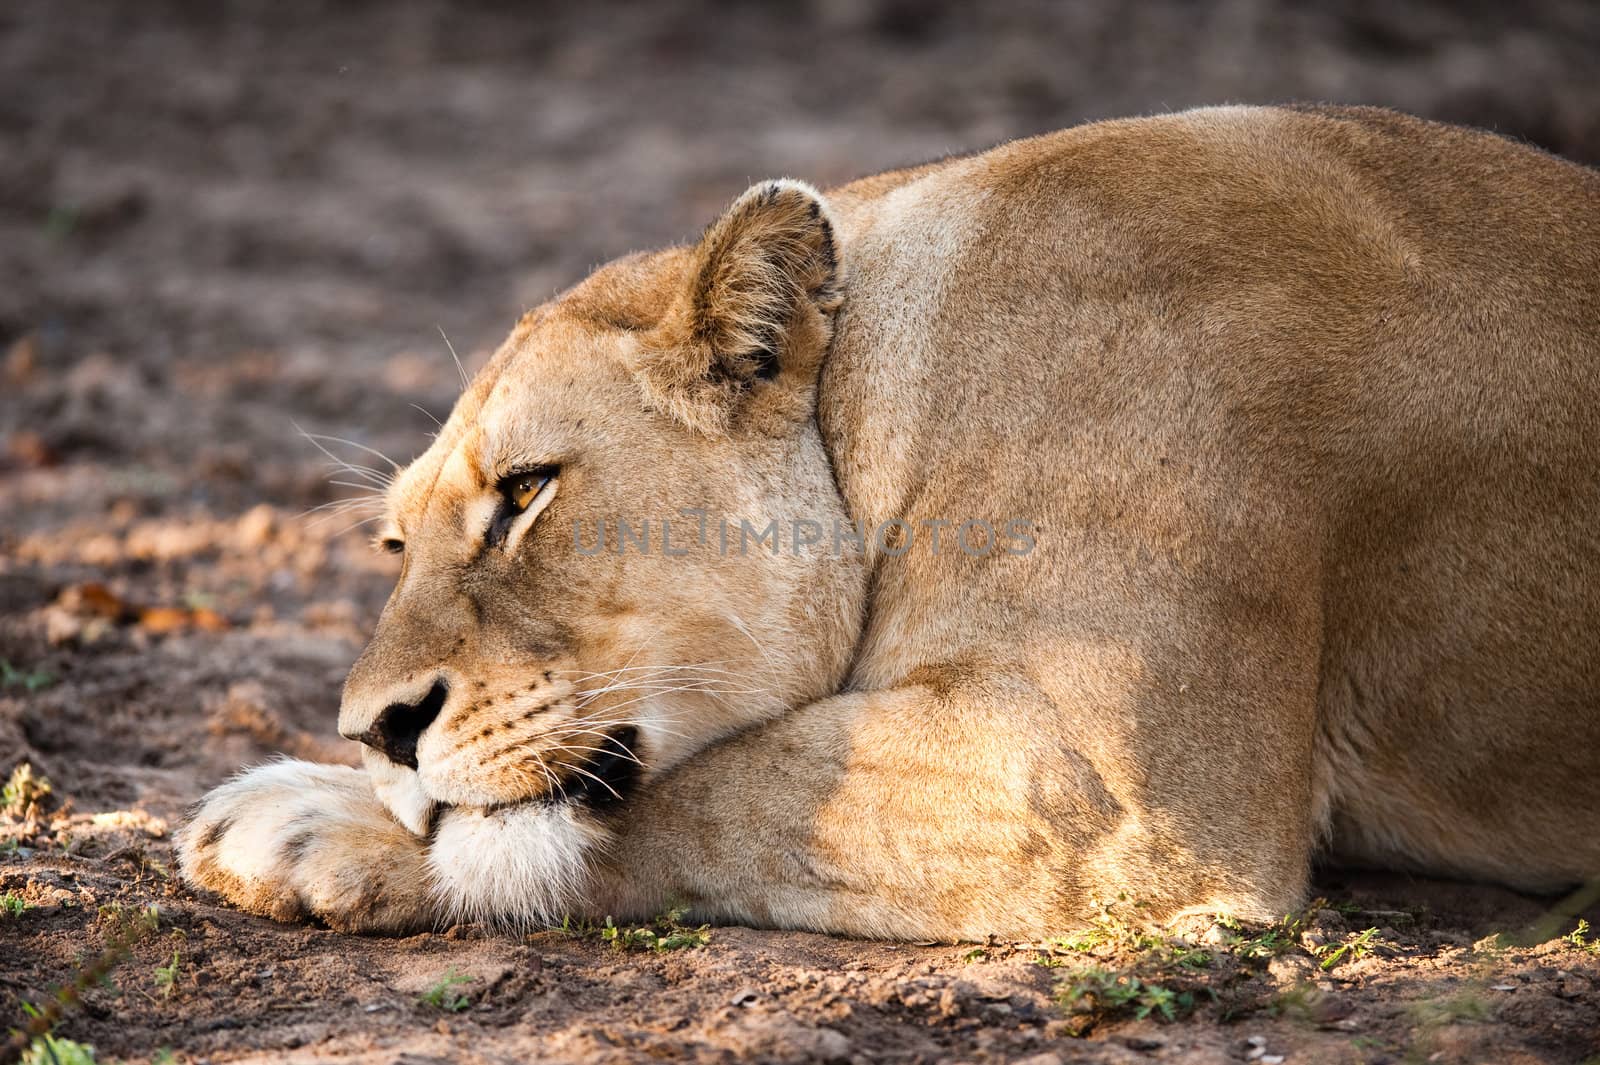 Female lion relaxing by edan